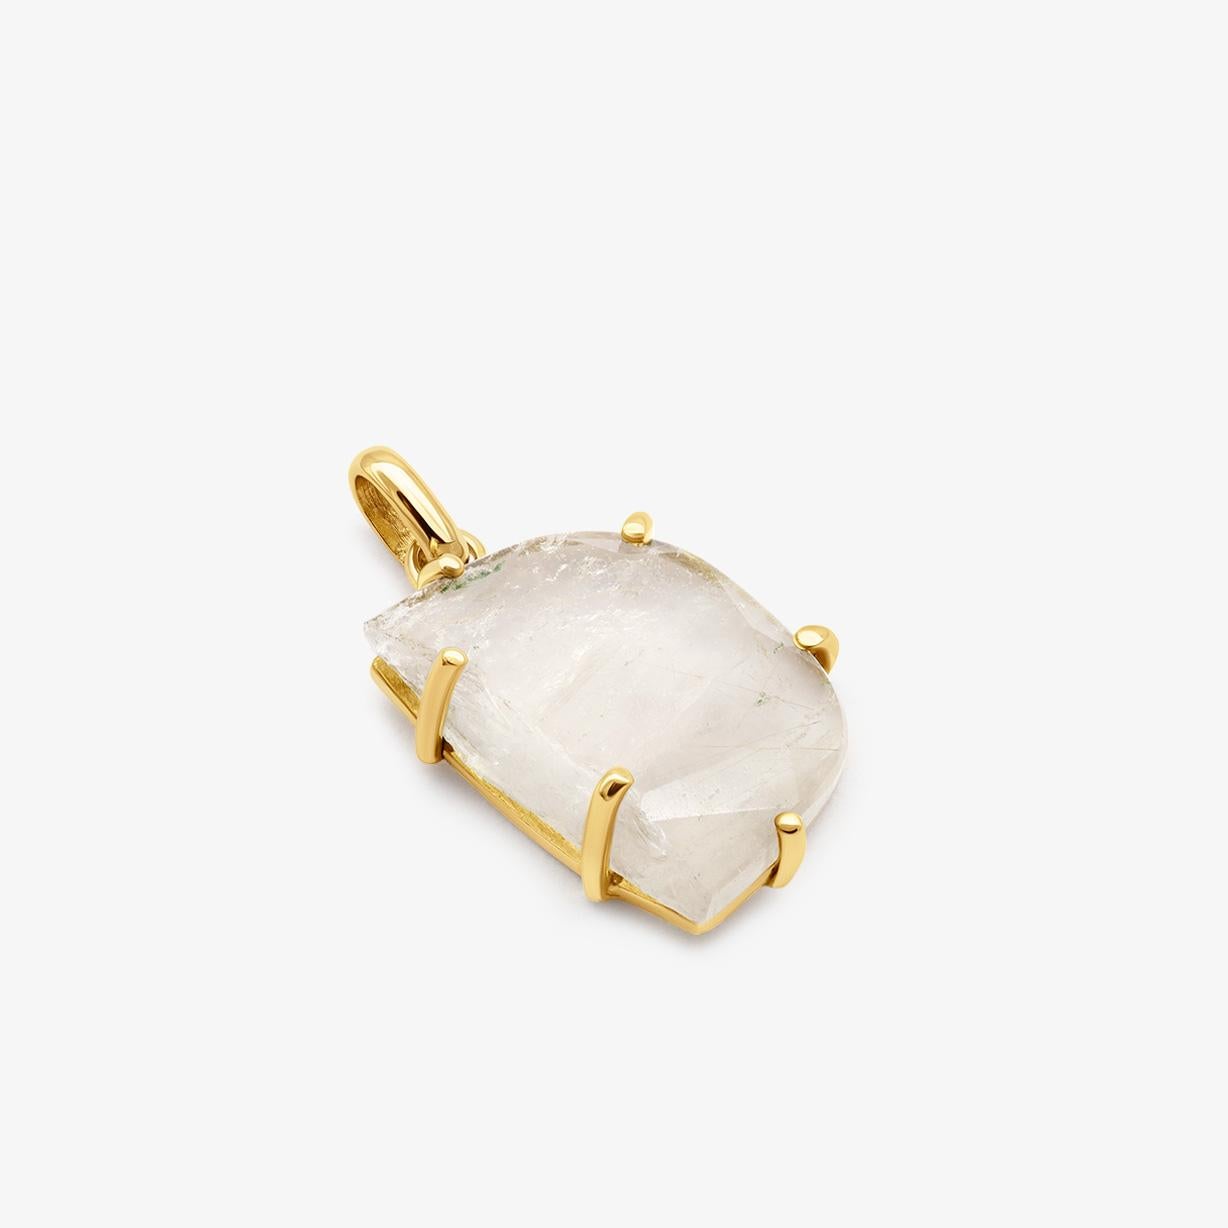 One-of-a-kind Quartz charm. Hand-made assembled on a 14-karat gold frame and recovered from our broken gems archives.

This pendant celebrates the beauty in imperfection.

Gemstones: Broken Quartz / Dimensions: 18 x 14mm / SUOT 585 engraving.